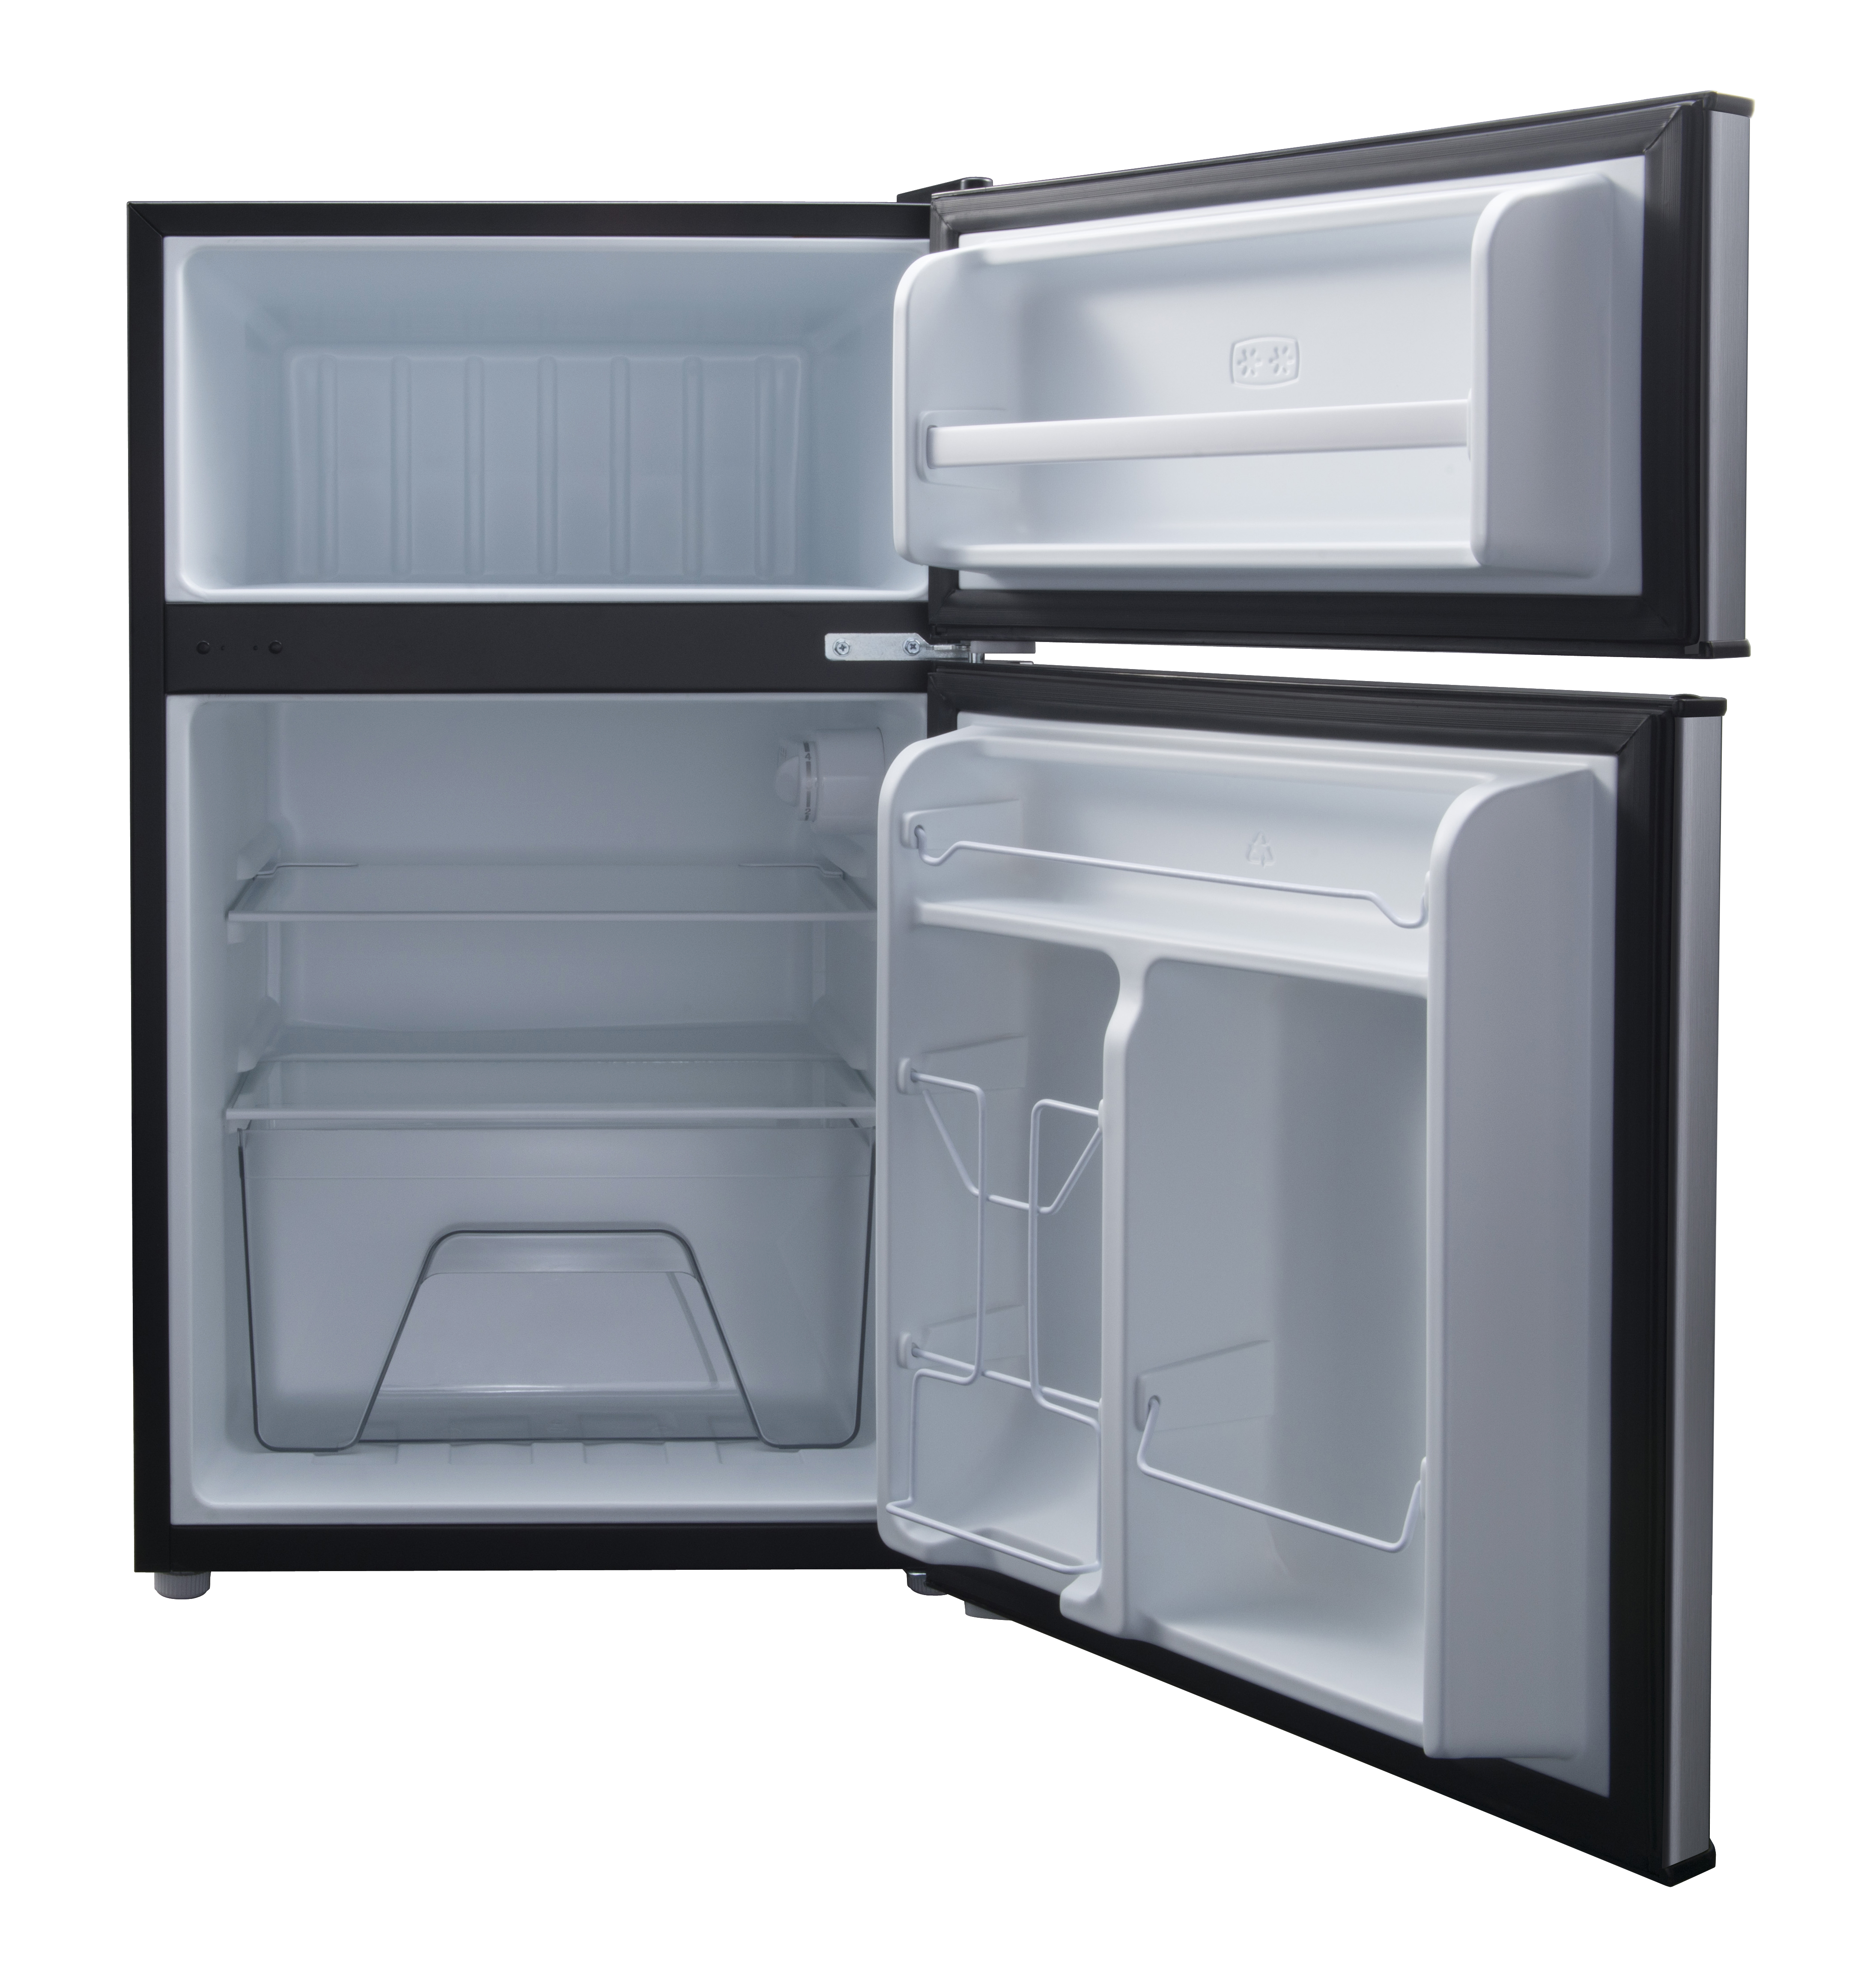 Galanz 3.1 Cu ft Two Door Mini Fridge with Freezer Estar GL31S5E, Stainless - image 4 of 6